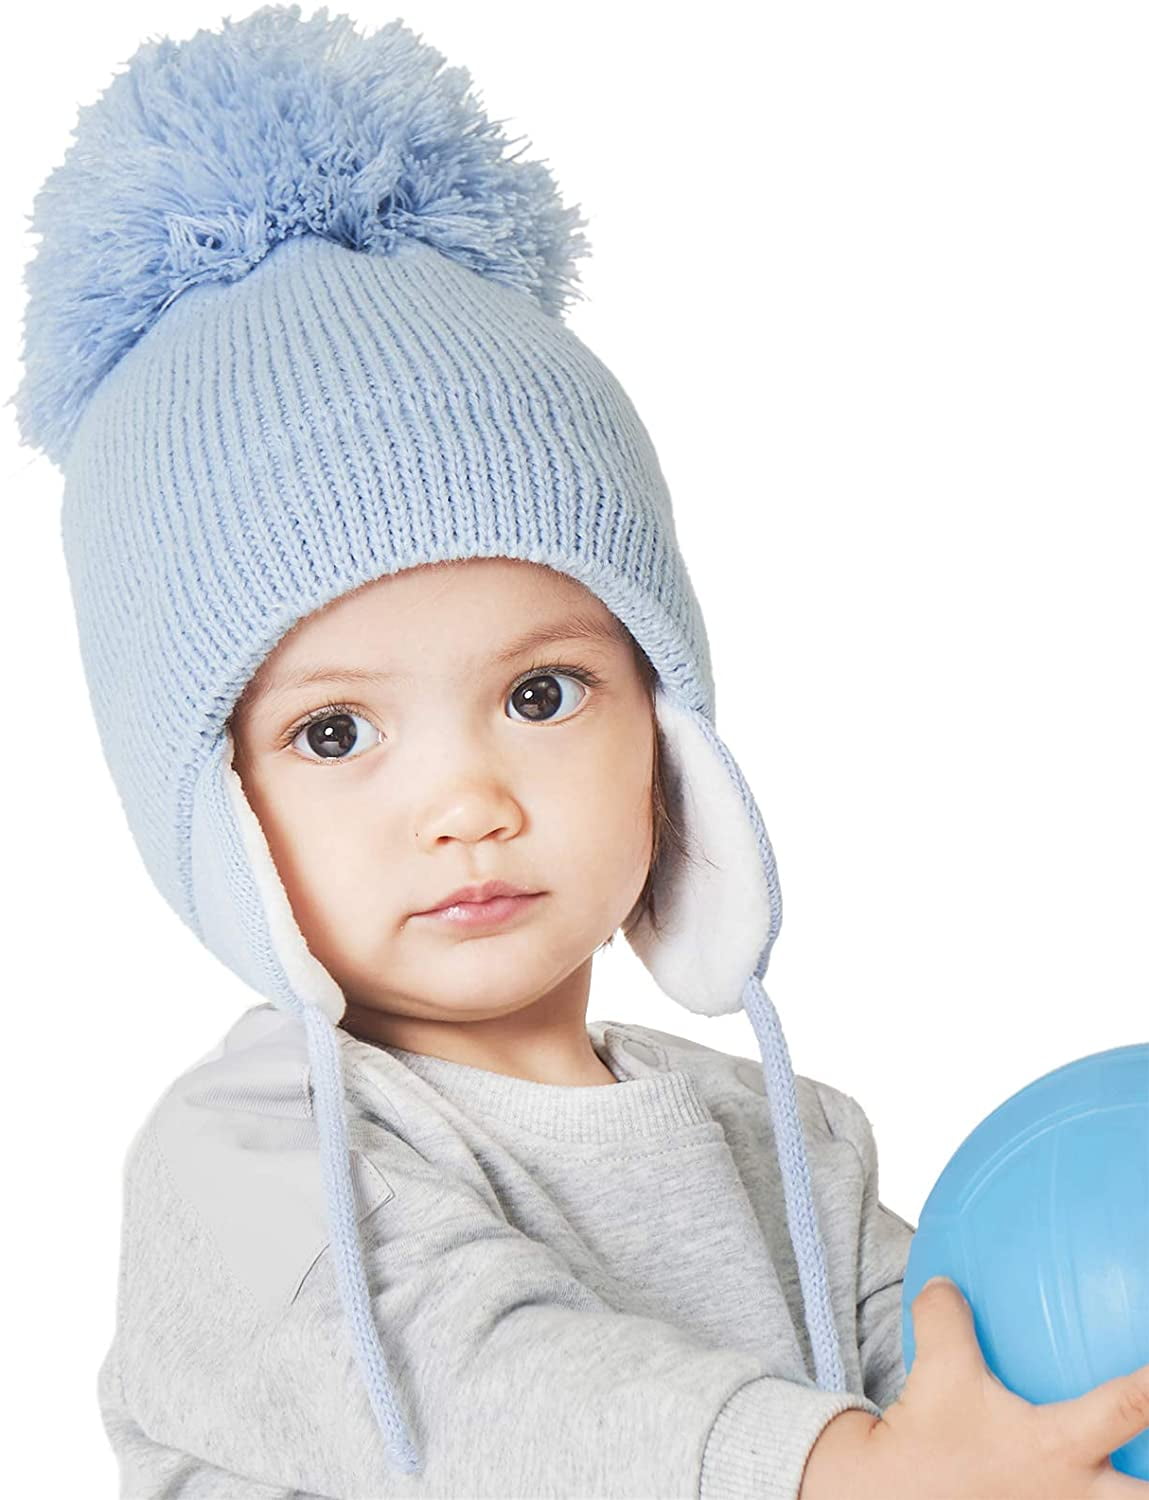 Baby Boys Girls warm winter Ear flaps pom pom Double layered knitted hat 0-12 m 